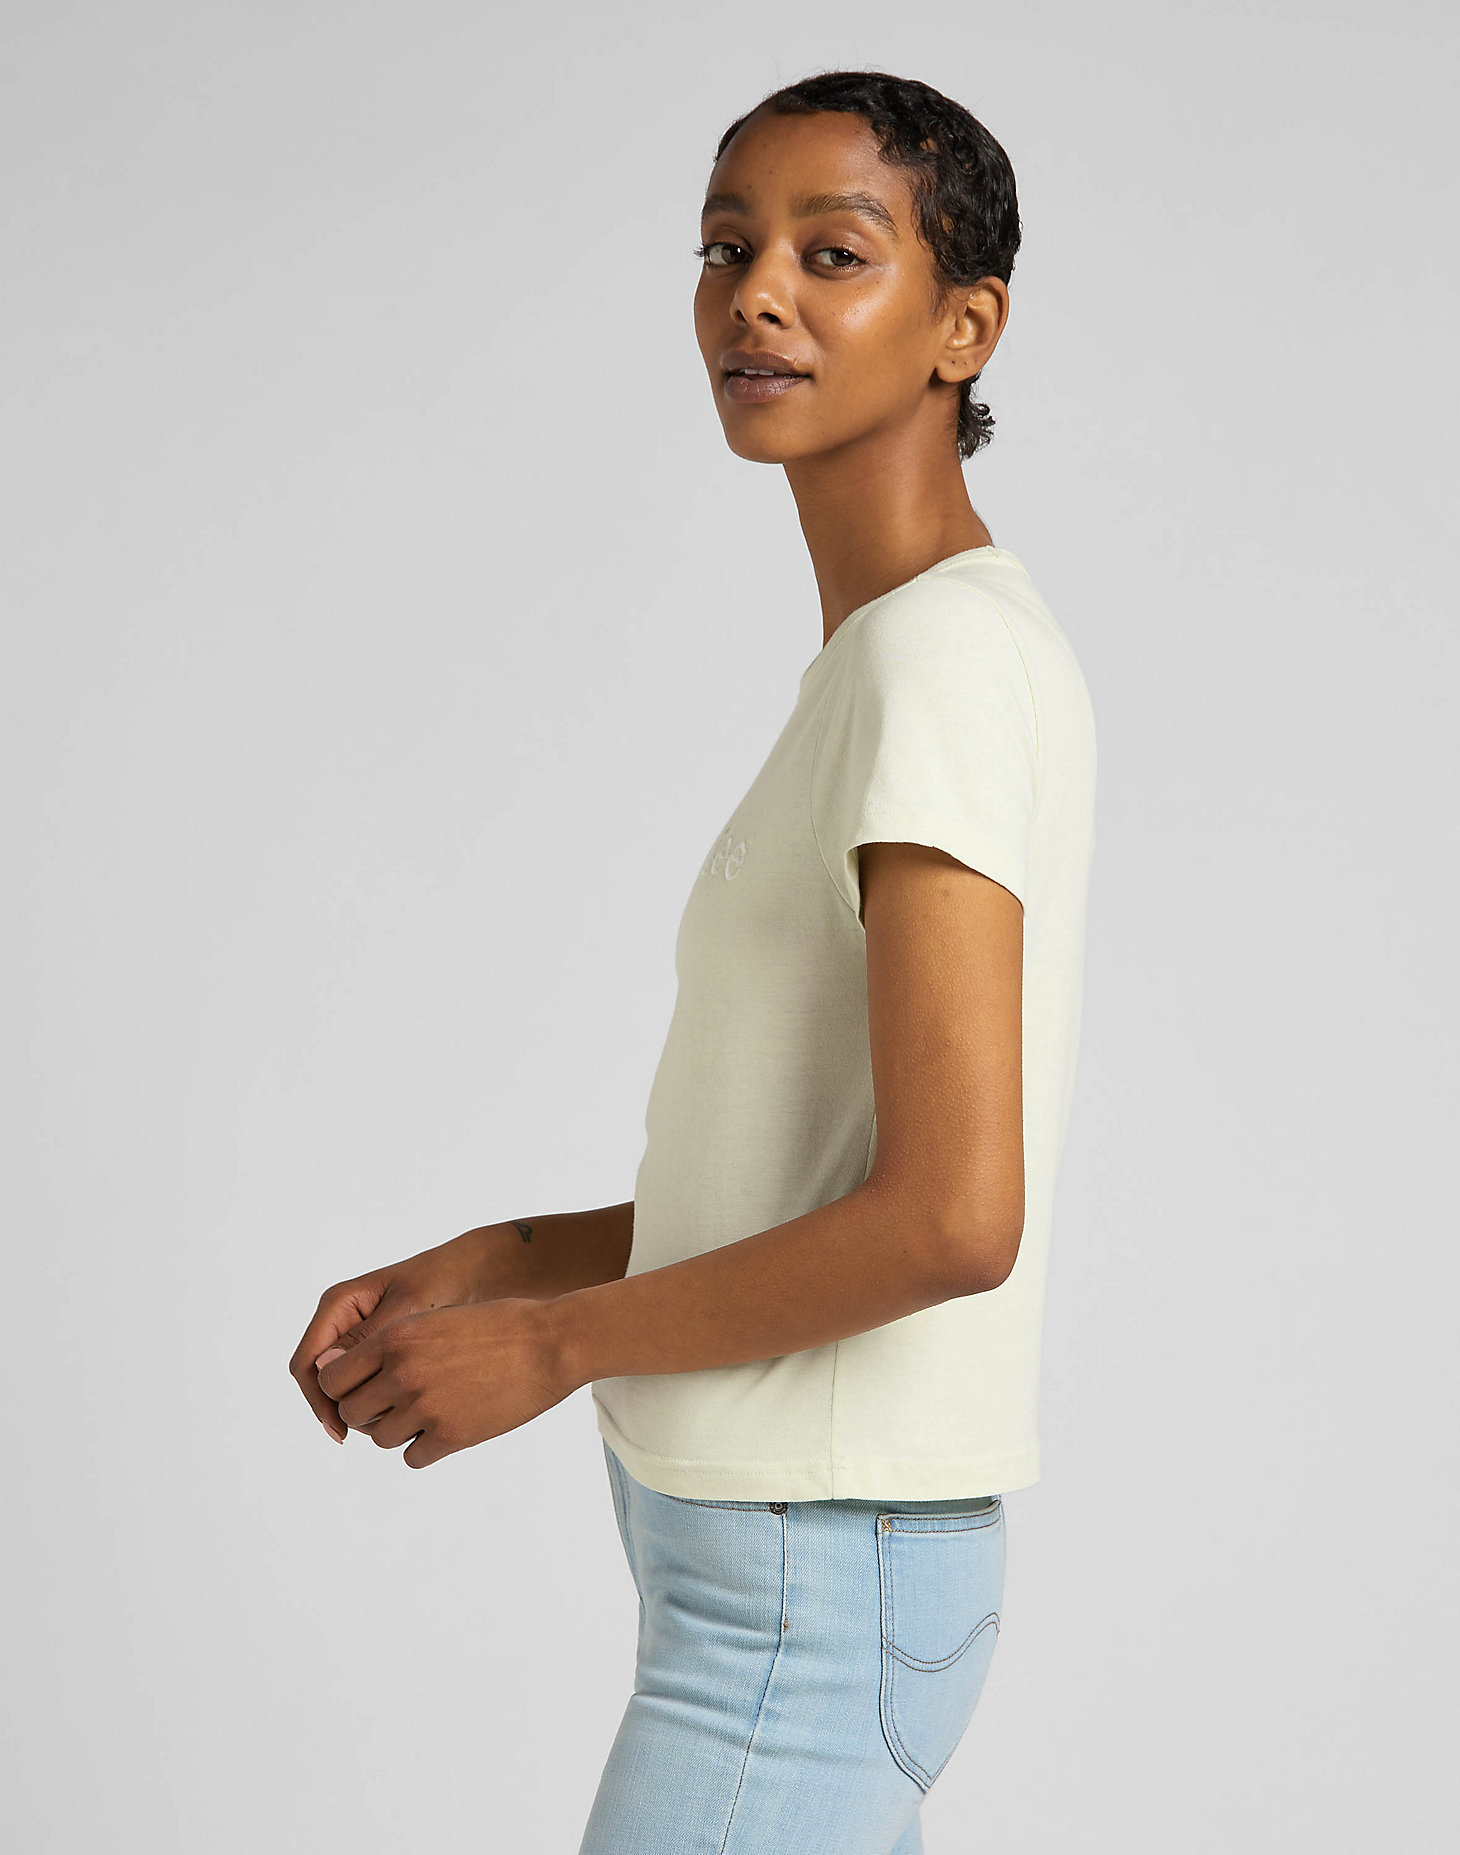 Slim Cropped Tee in Canary Green alternative view 3